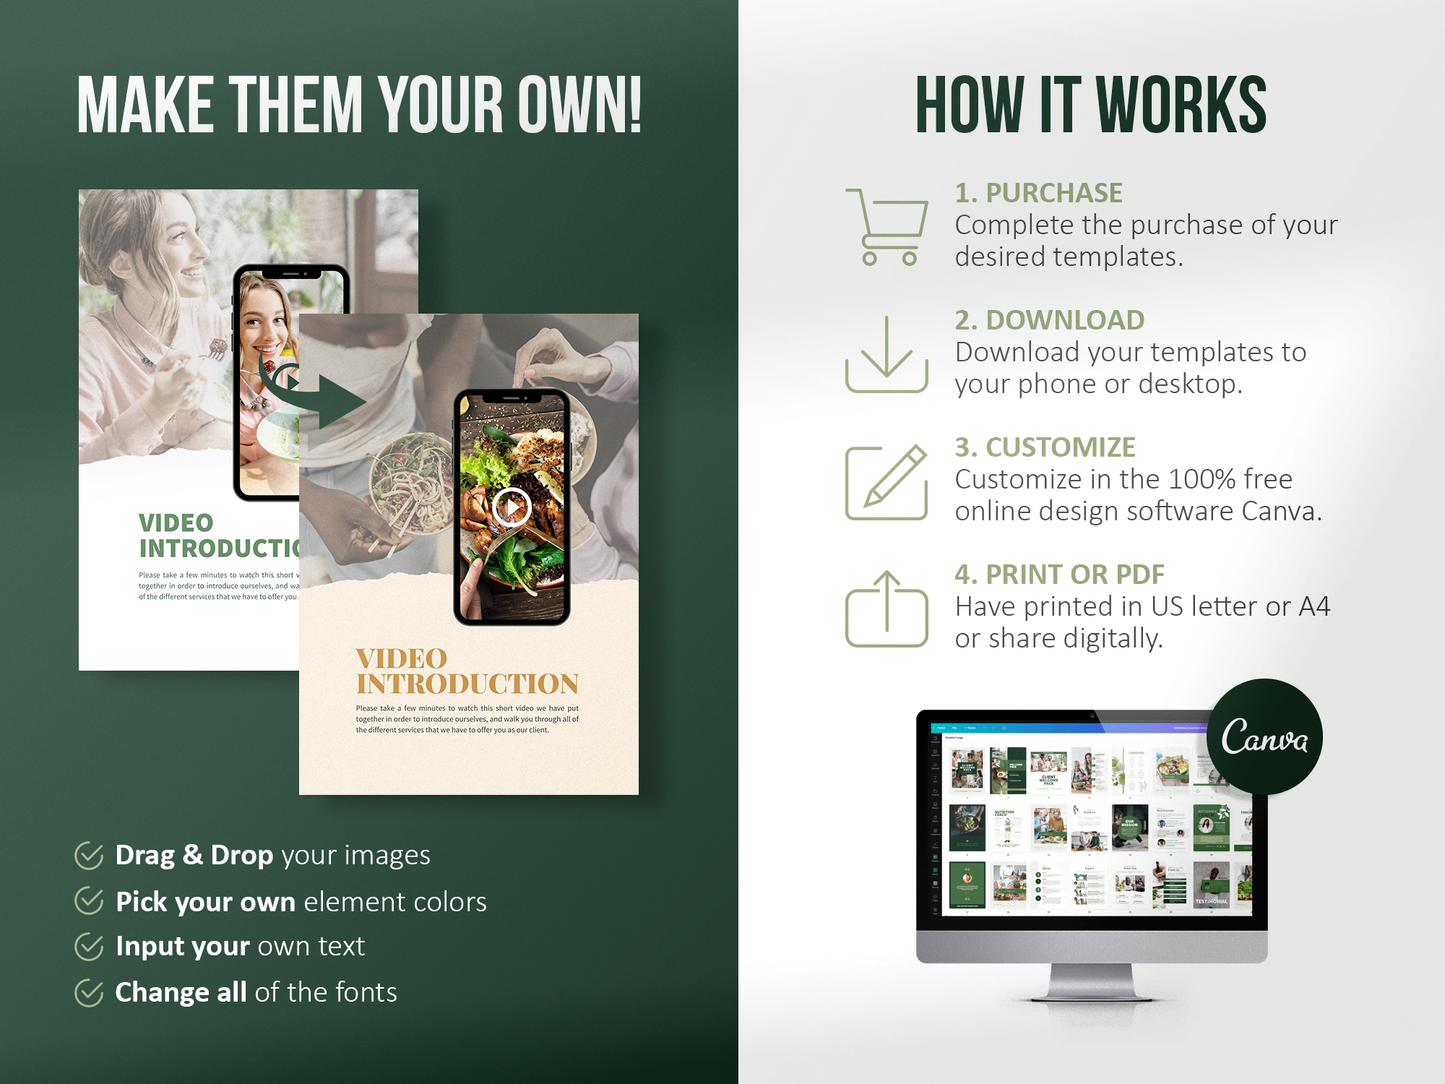 Nutrition Client Welcome Pack and Client Goodbye Pack Templates (Olive)